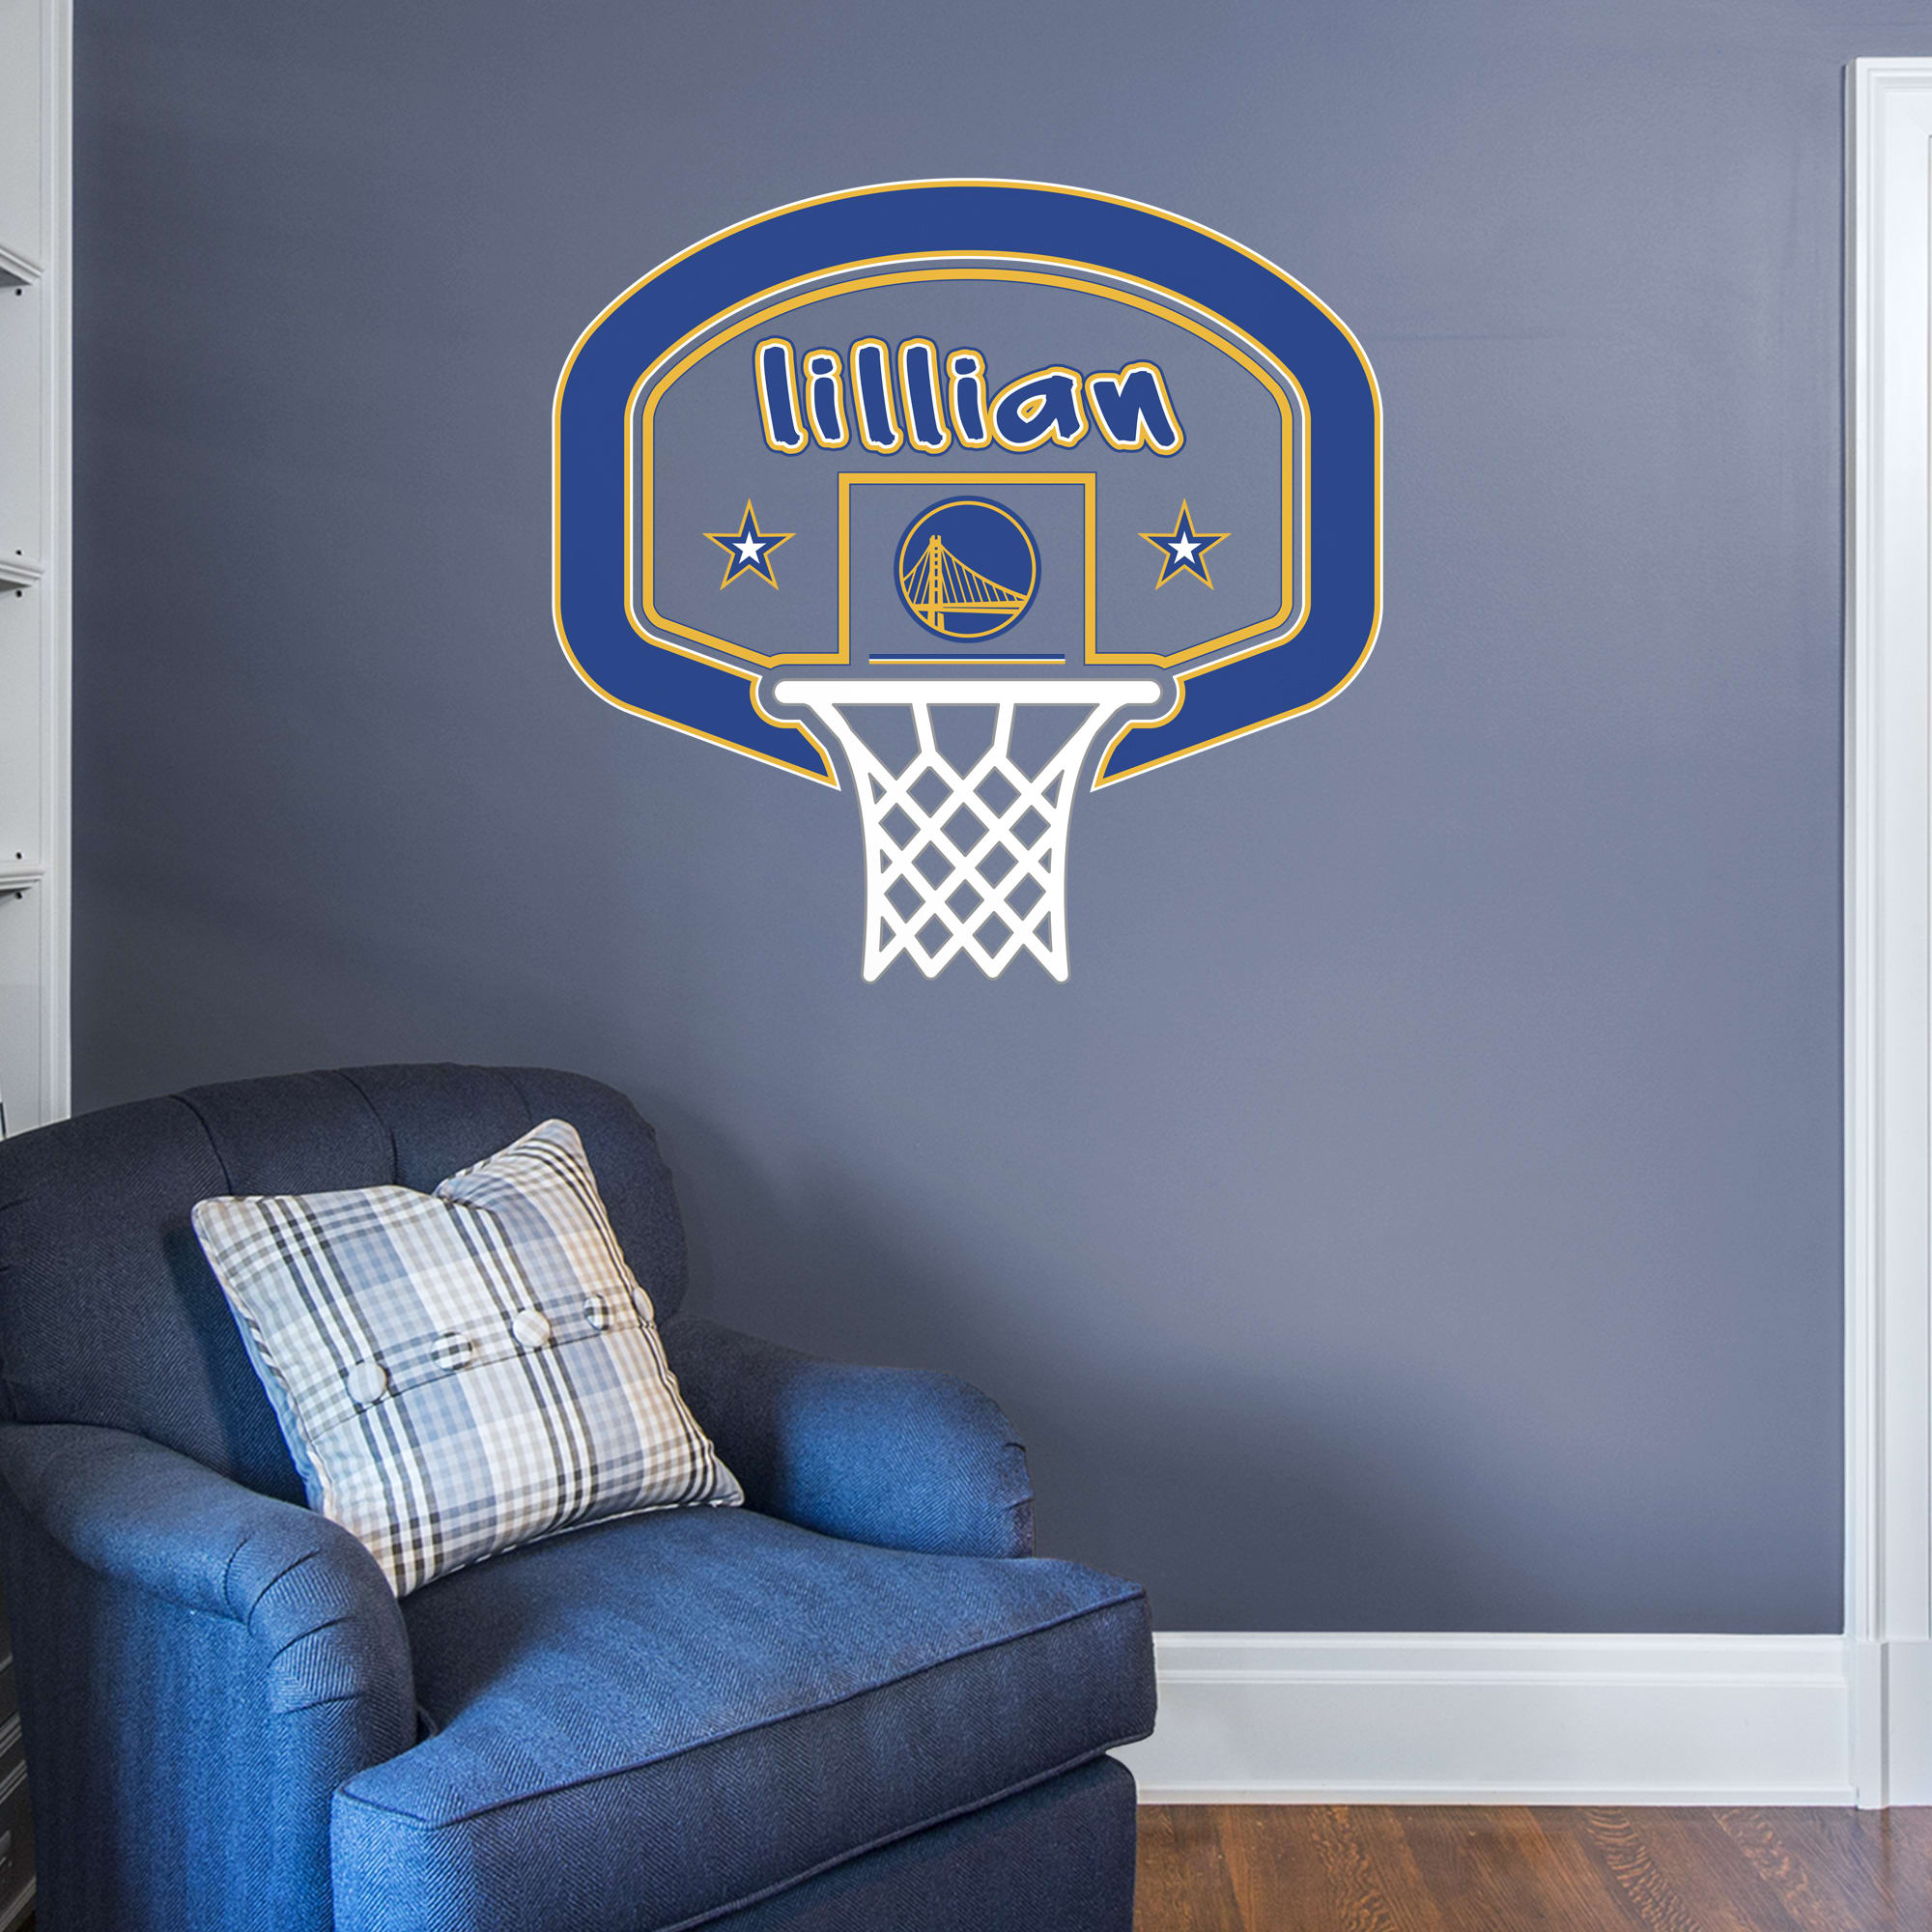 Golden State Warriors: Personalized Name - Officially Licensed NBA Transfer Decal 40.0"W x 38.0"H by Fathead | Vinyl